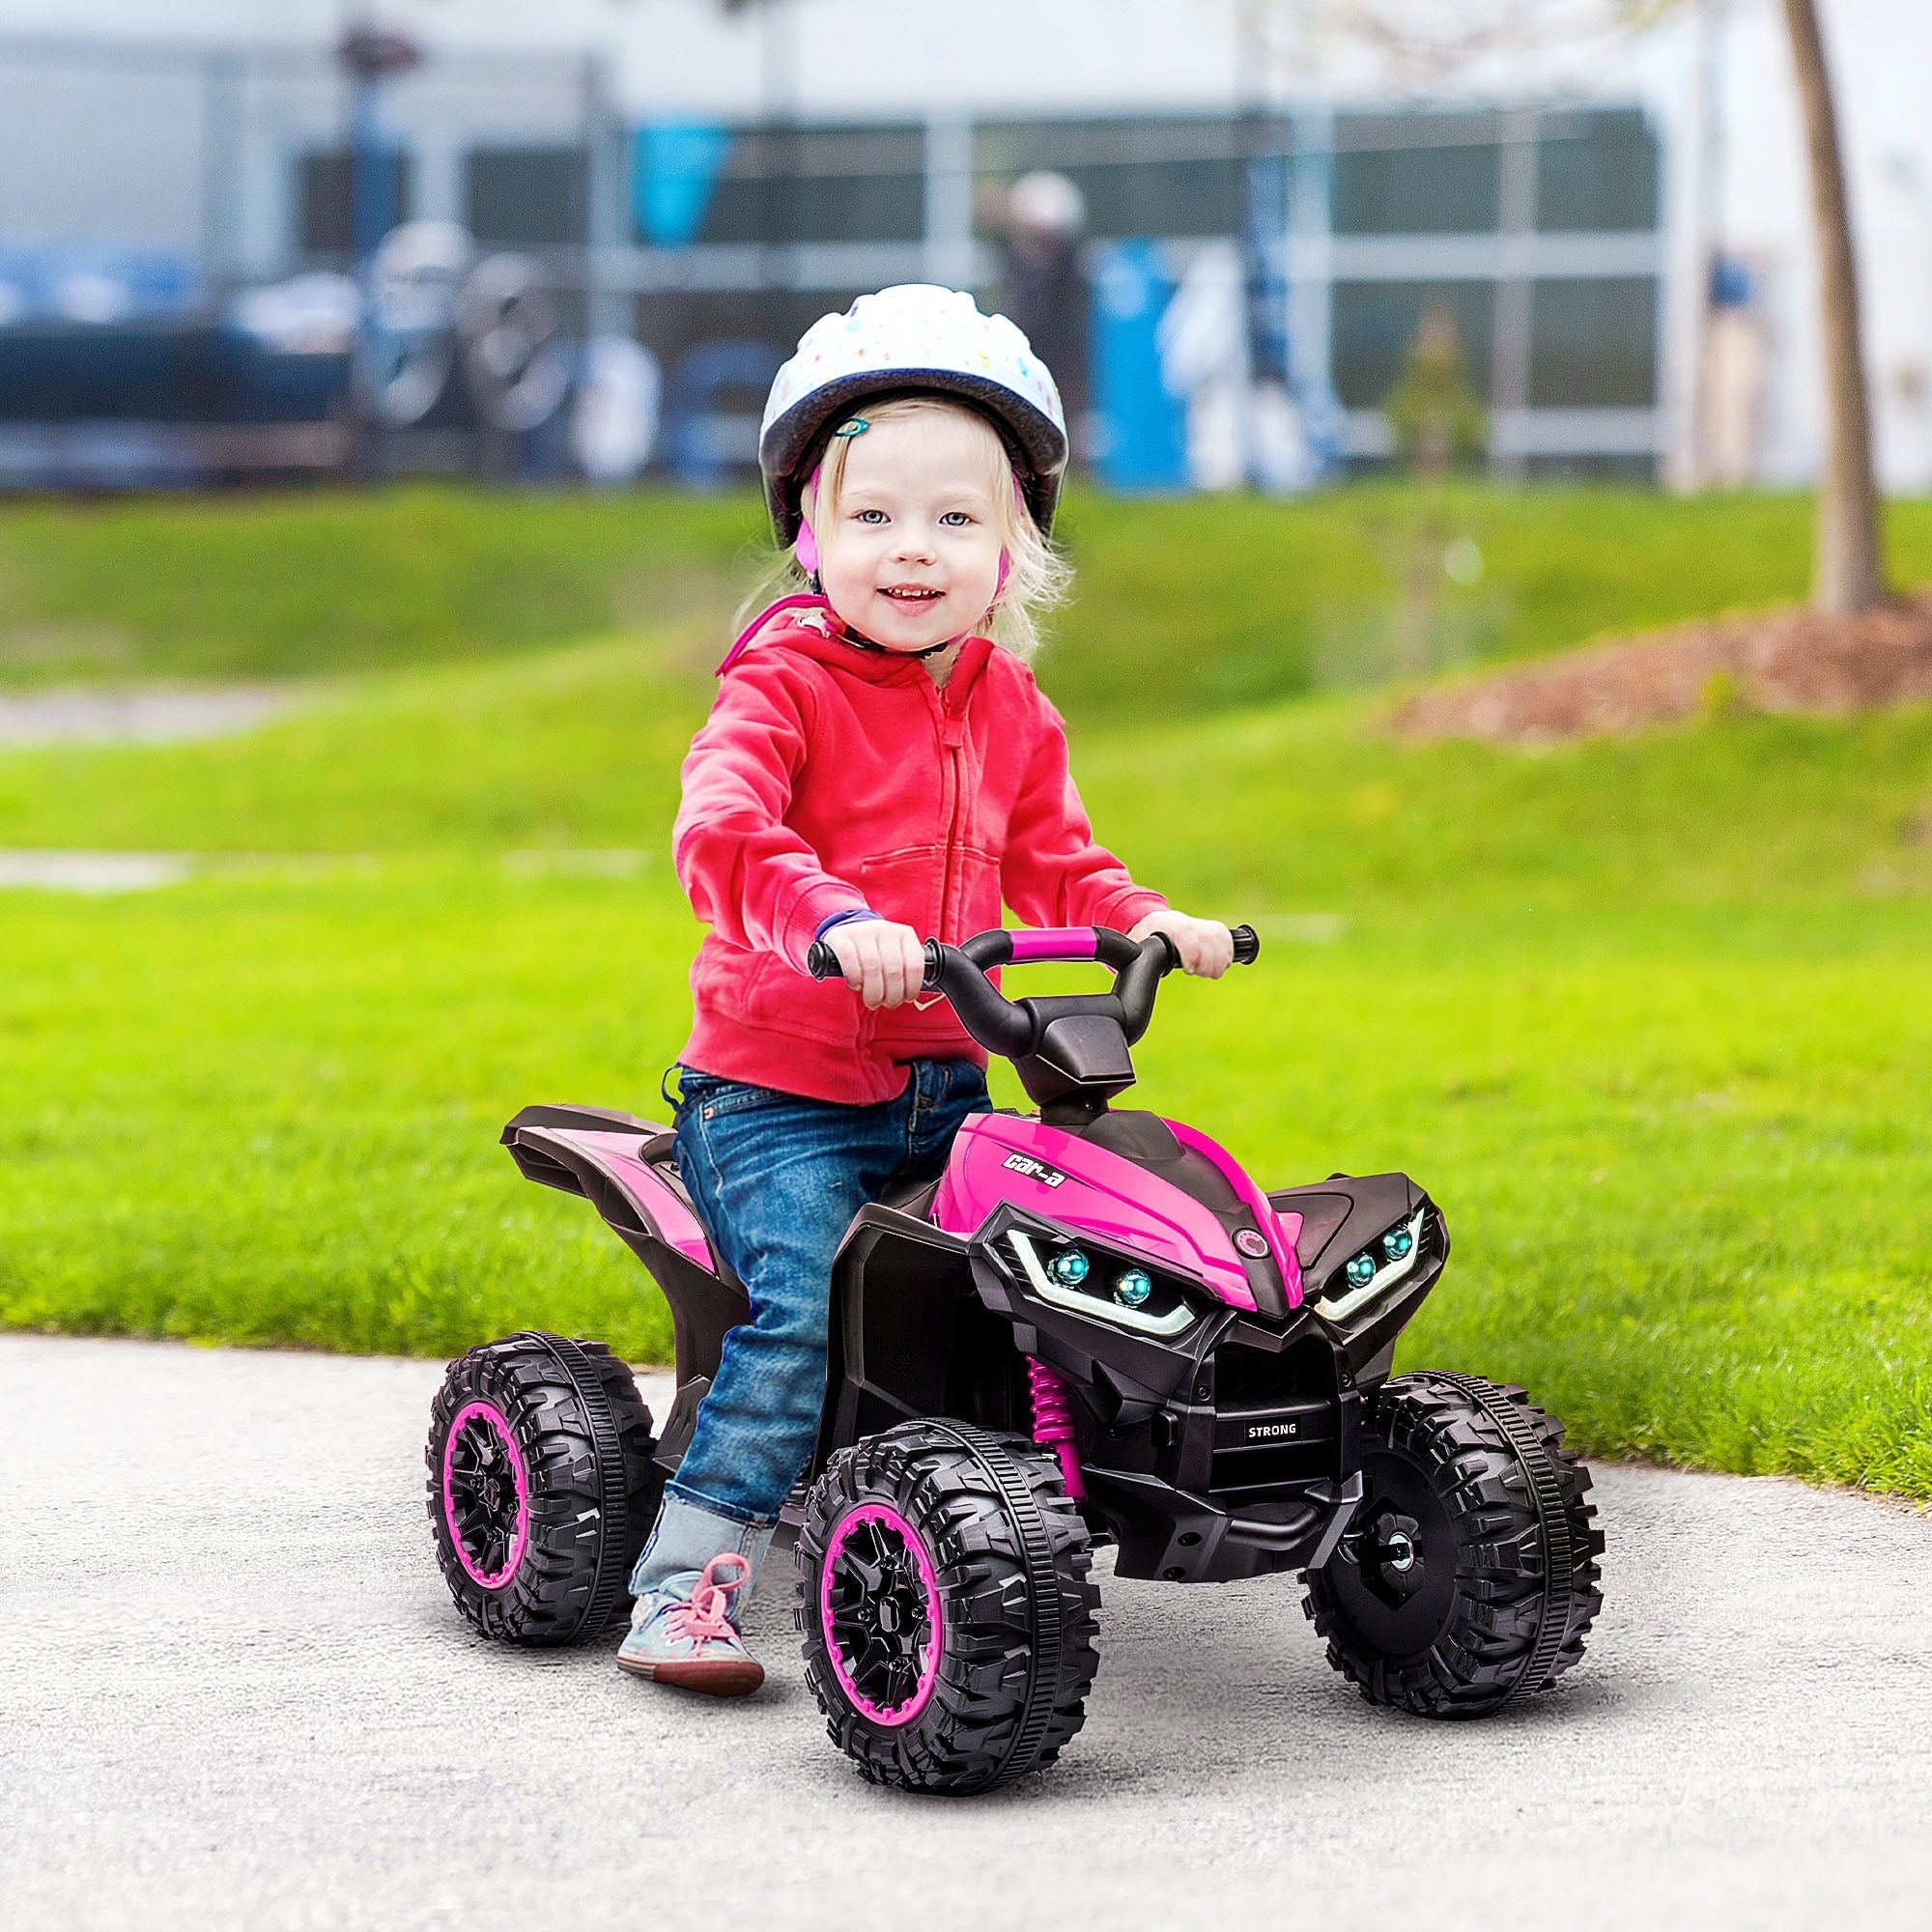 12V Quad Bike with Forward Reverse Functions, Ride on Car ATV Toy with High/Low Speed, Slow Start, Suspension System, Horn, Music, Pink-1